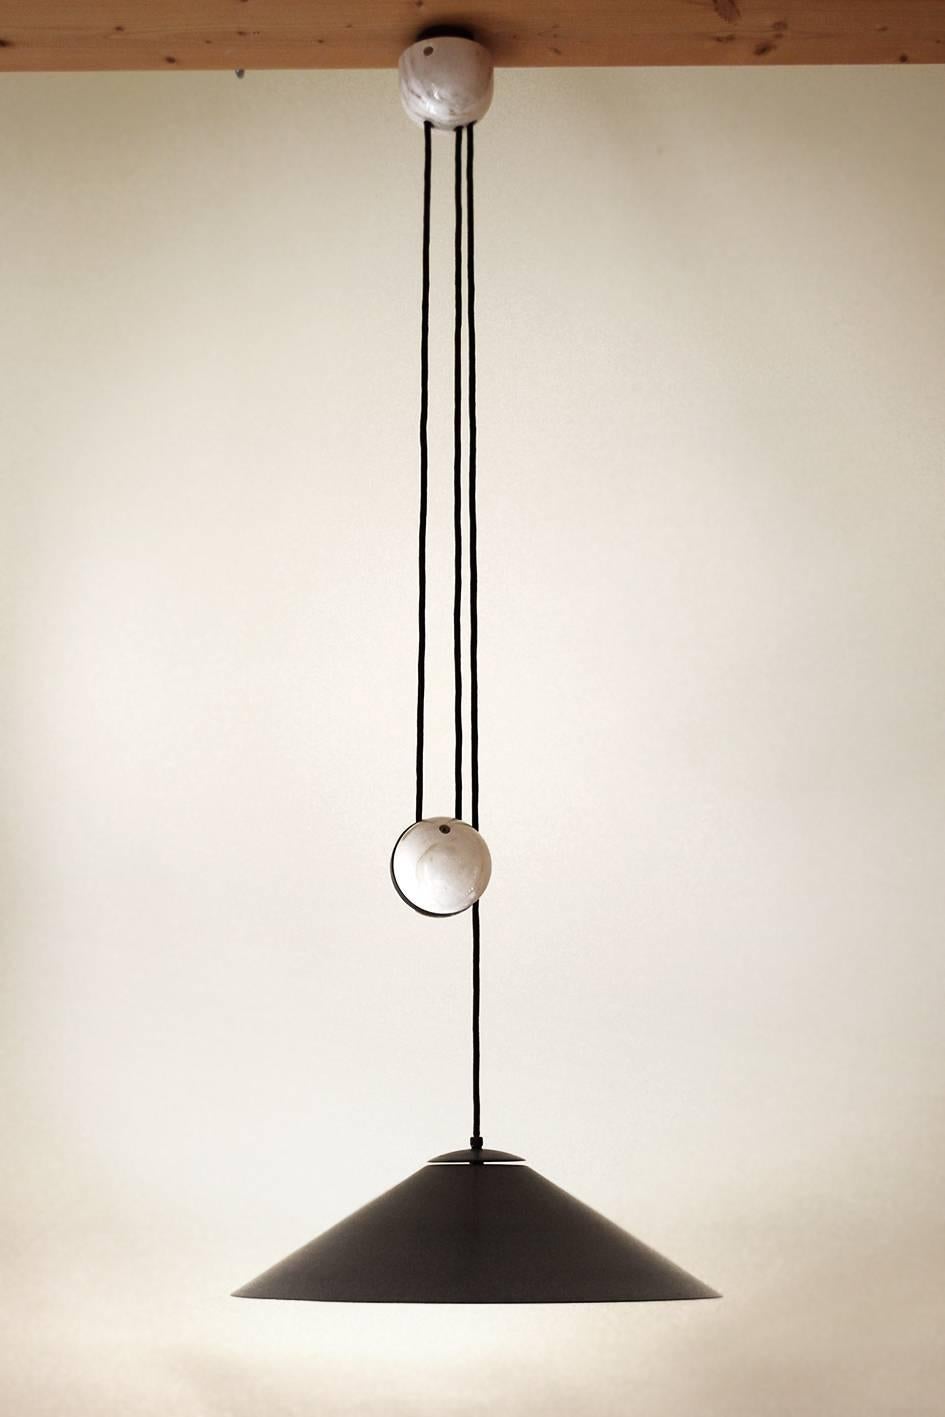 Large brass and marble adjustable counterweight pendant. 
Germany, 1960s.
Solid brass schade with beautiful patina. The outside is burnished and the inside is brushed.
Measurements: Diameter: 19.5 in, Height (lampshade): 6.2 in;
Lamp sockets: 2x E27